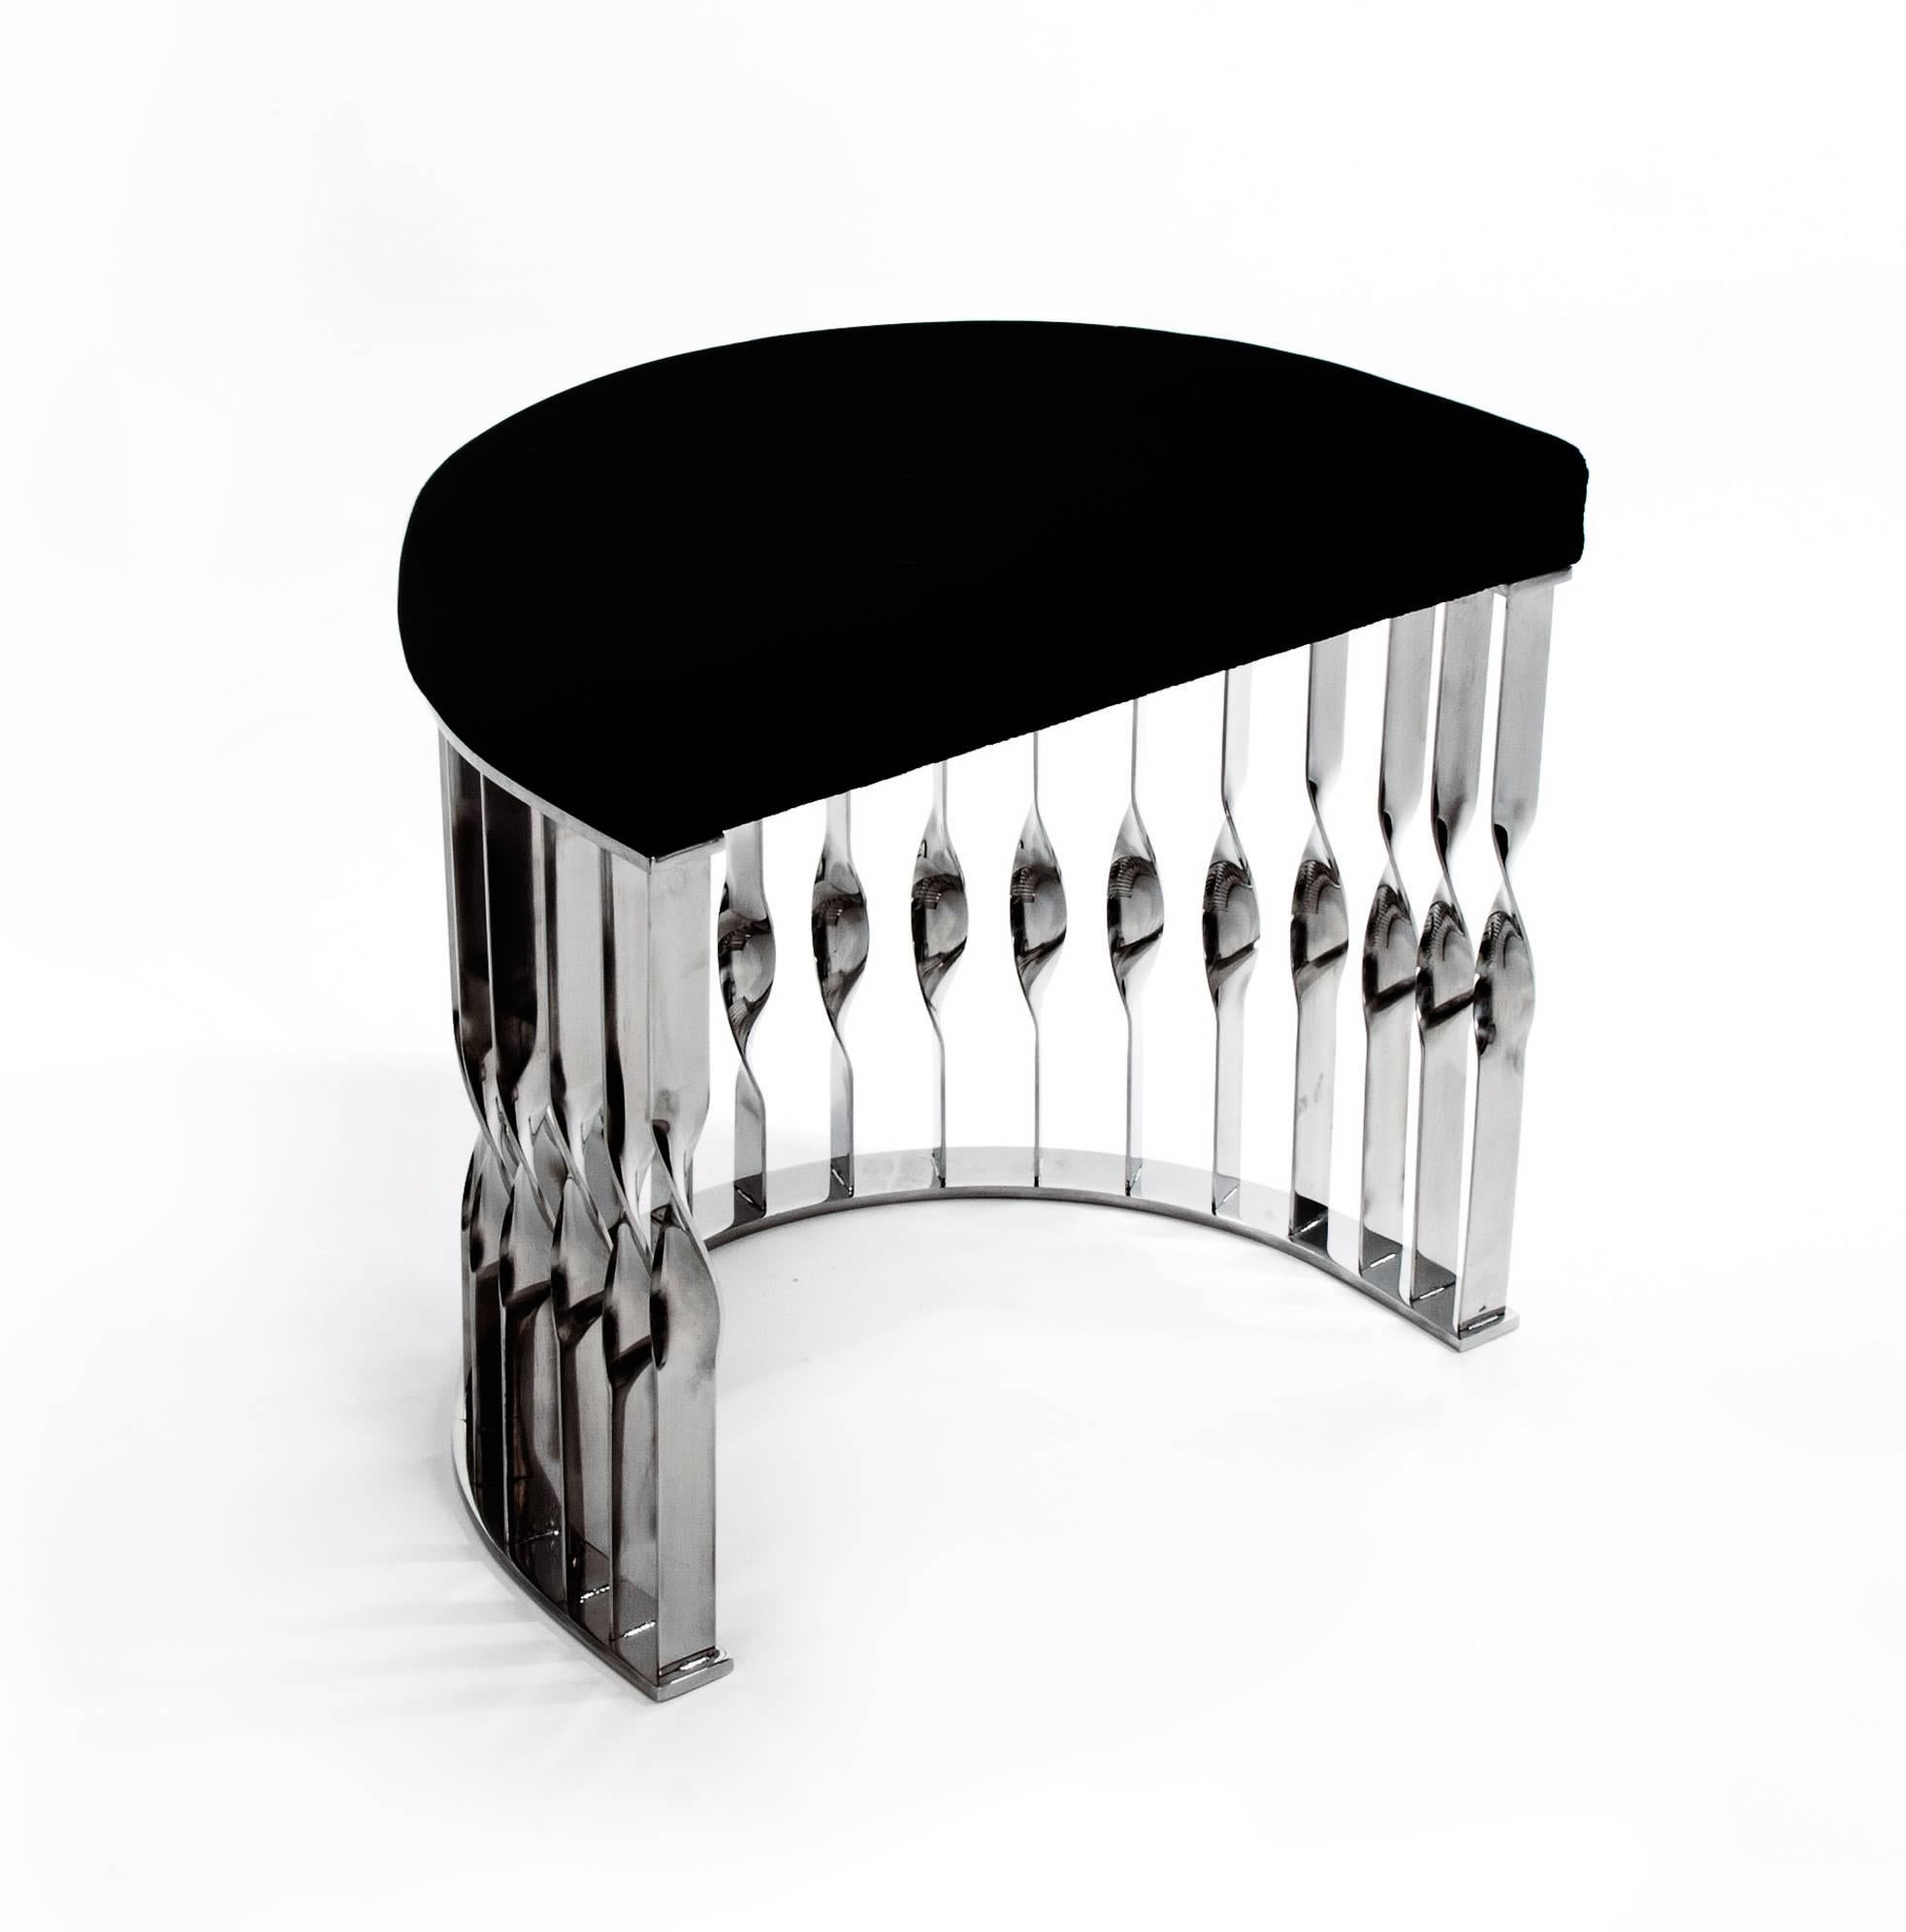 This fluid and unusual stool transcends design and jewelry. Conceived from a cuff bracelet, the Mandy stool will embellish any setting with its soft black velvet upholstery and a base in twisted high-gloss polished stainless steel.
Standard finish